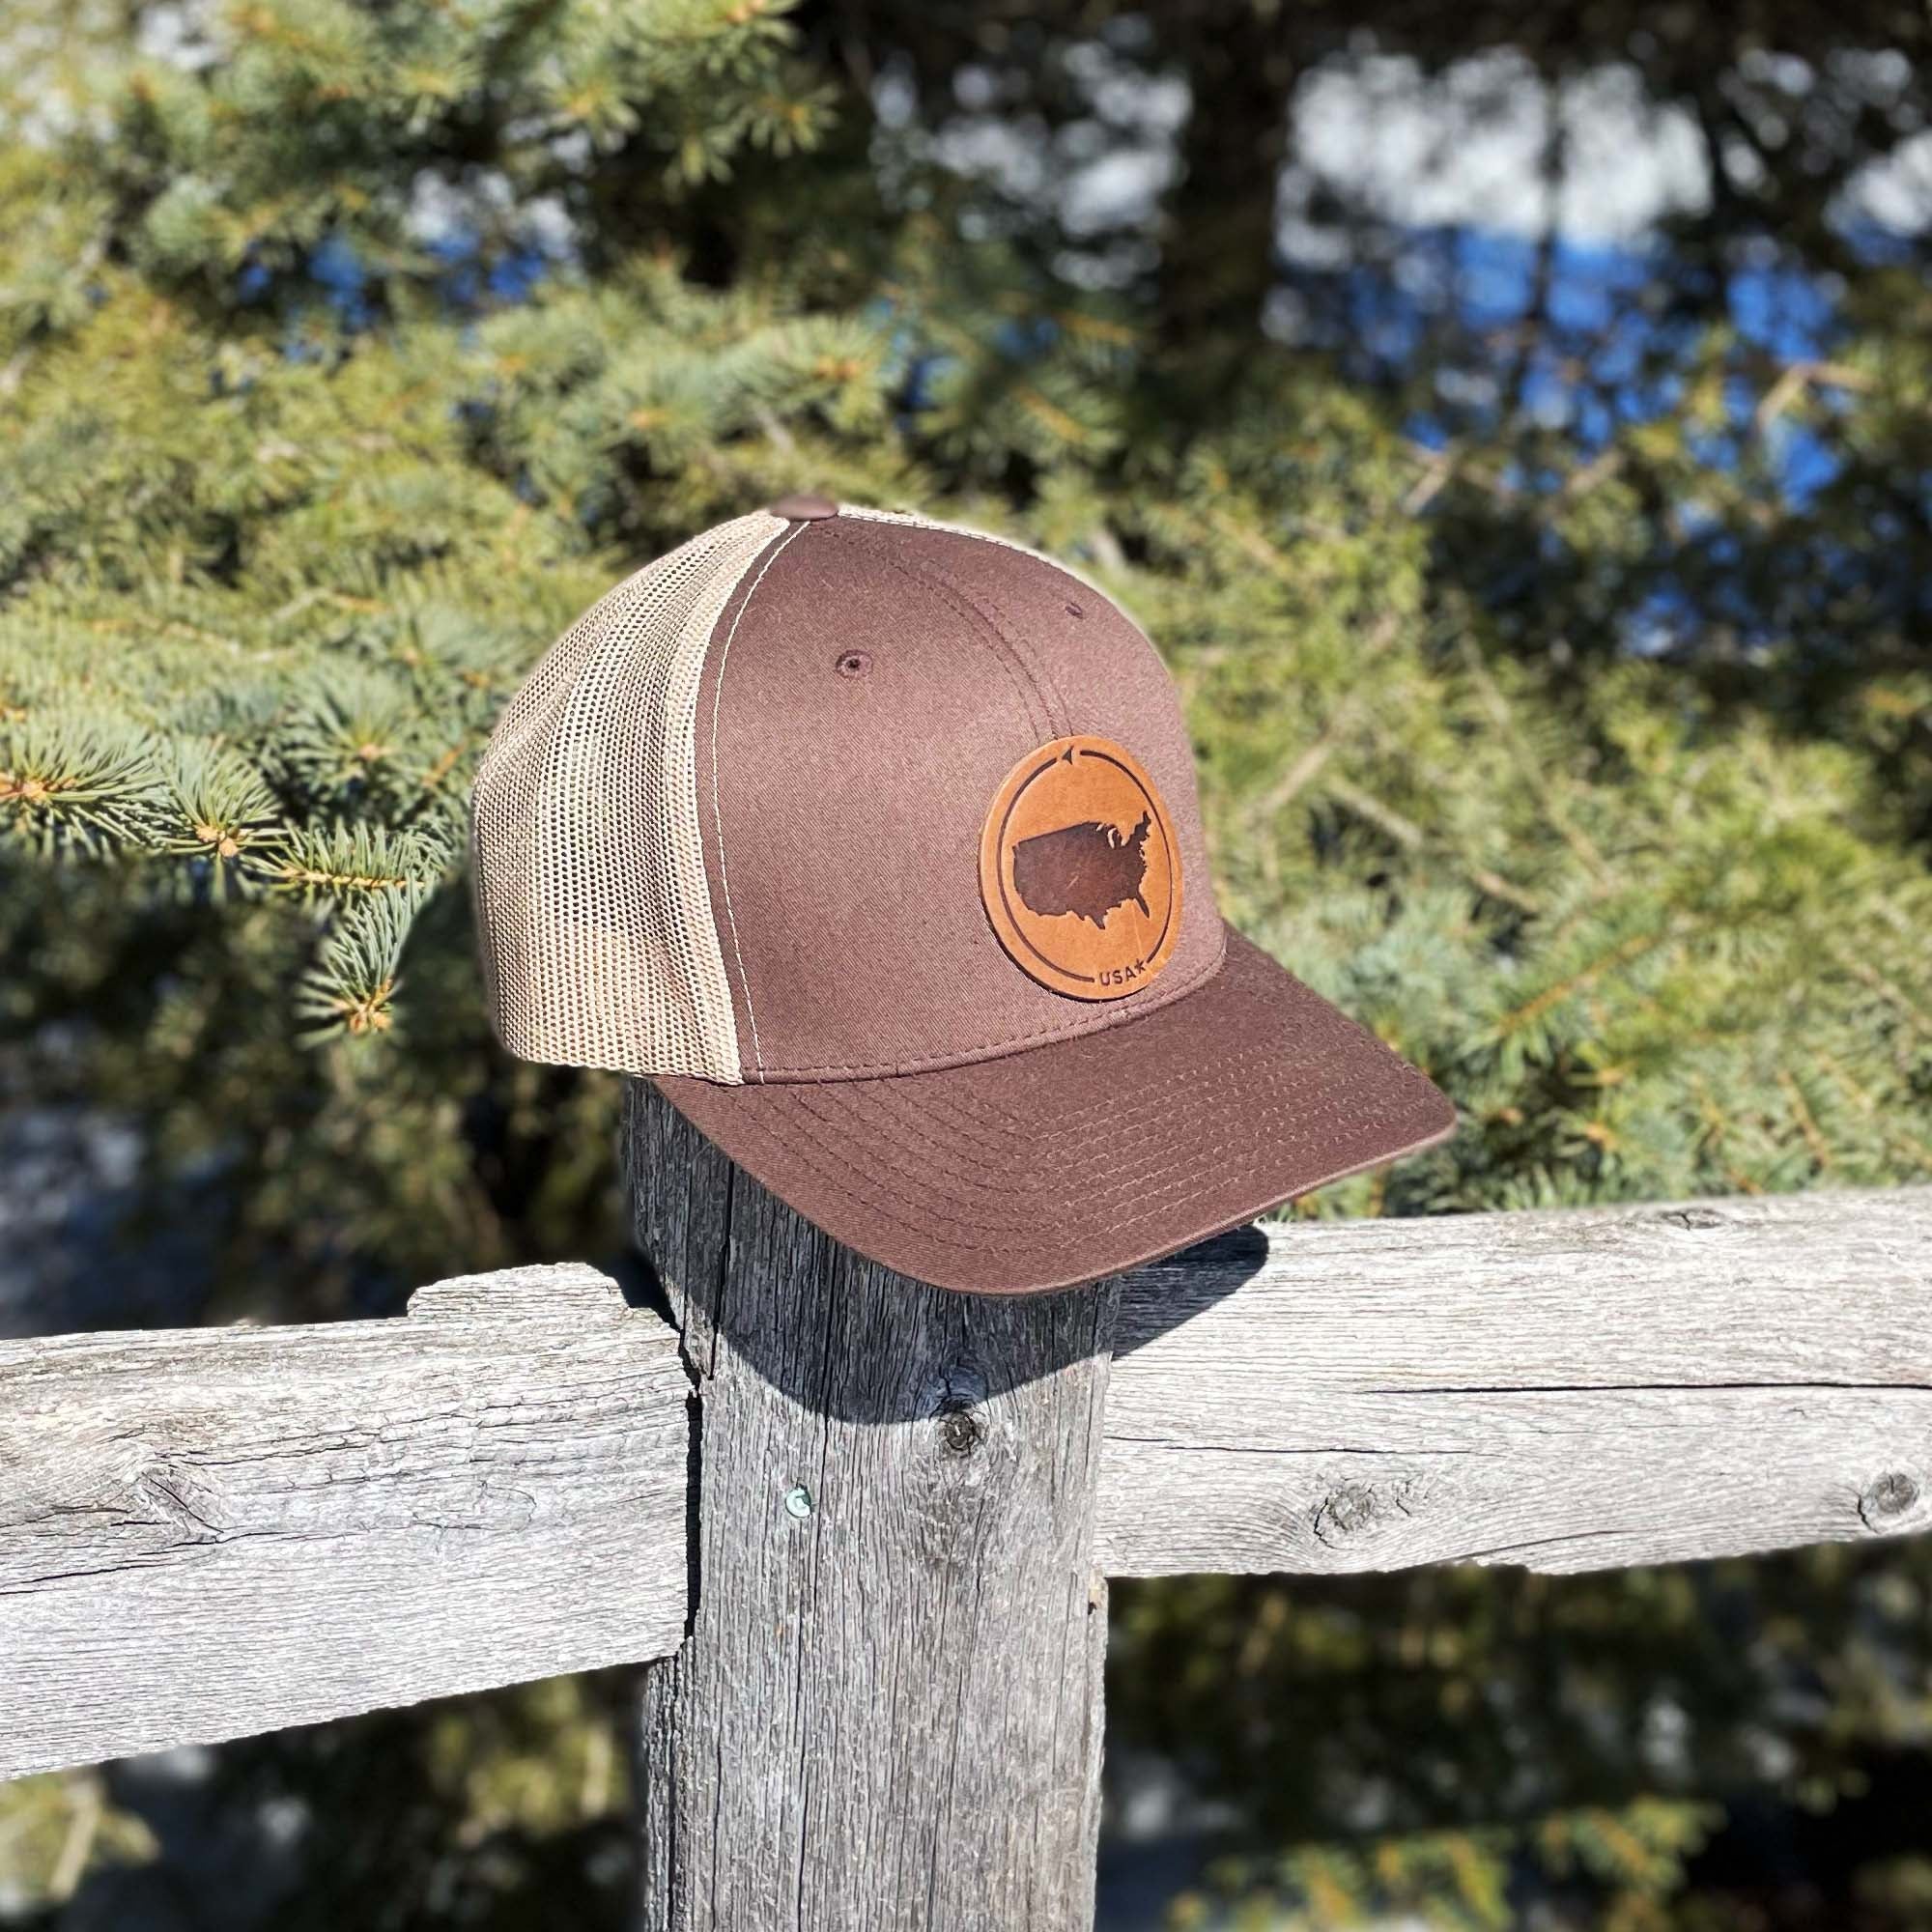 Brown and khaki trucker hat with full-grain leather patch of USA | BLACK-003-001, CHARC-003-001, NAVY-003-001, HGREY-003-001, MOSS-003-001, BROWN-003-001